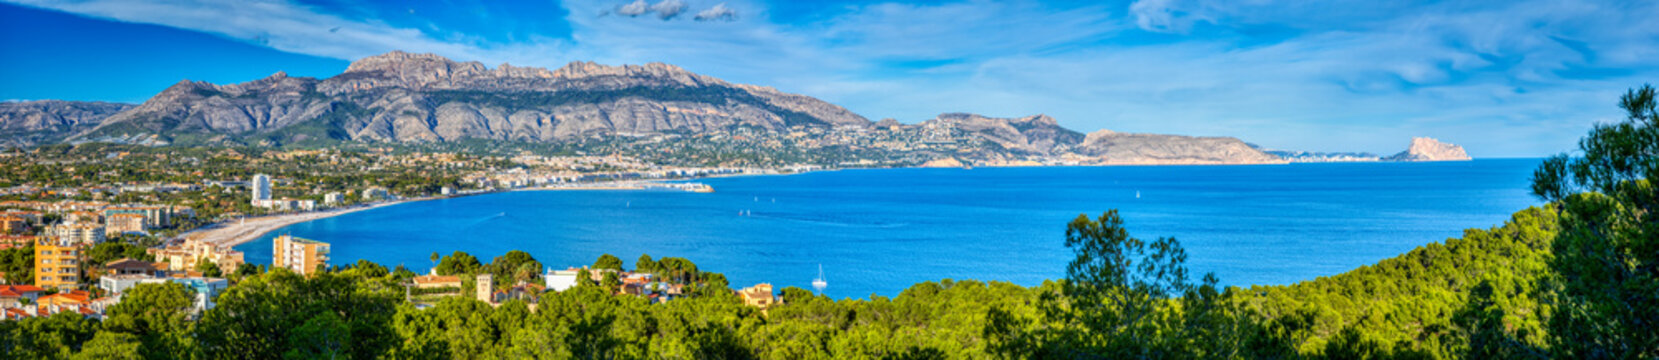 A panoramic view of Altea and the Costa Blanca from the Natural Park Serra Gelada with a bright blue ocean and sky and the mountains and towns of the surrounding area and the green trees of the park